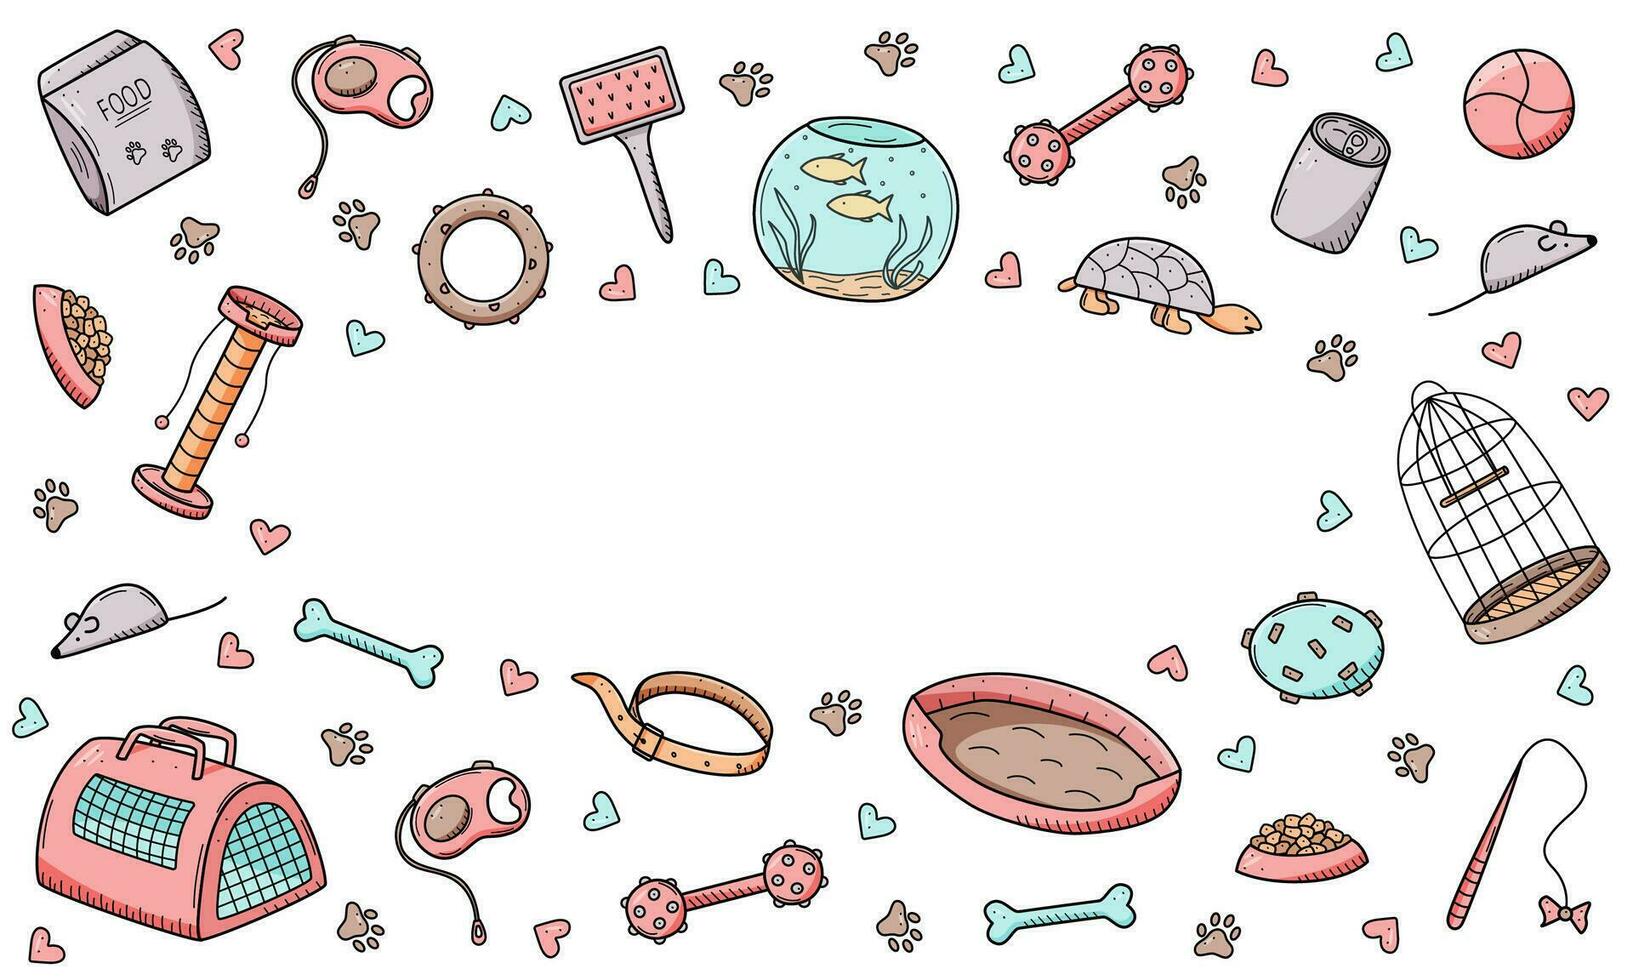 Pet store doodle, a set of icons of goods for the animal store. Vector illustration items accessories for pet dogs cats and animals.